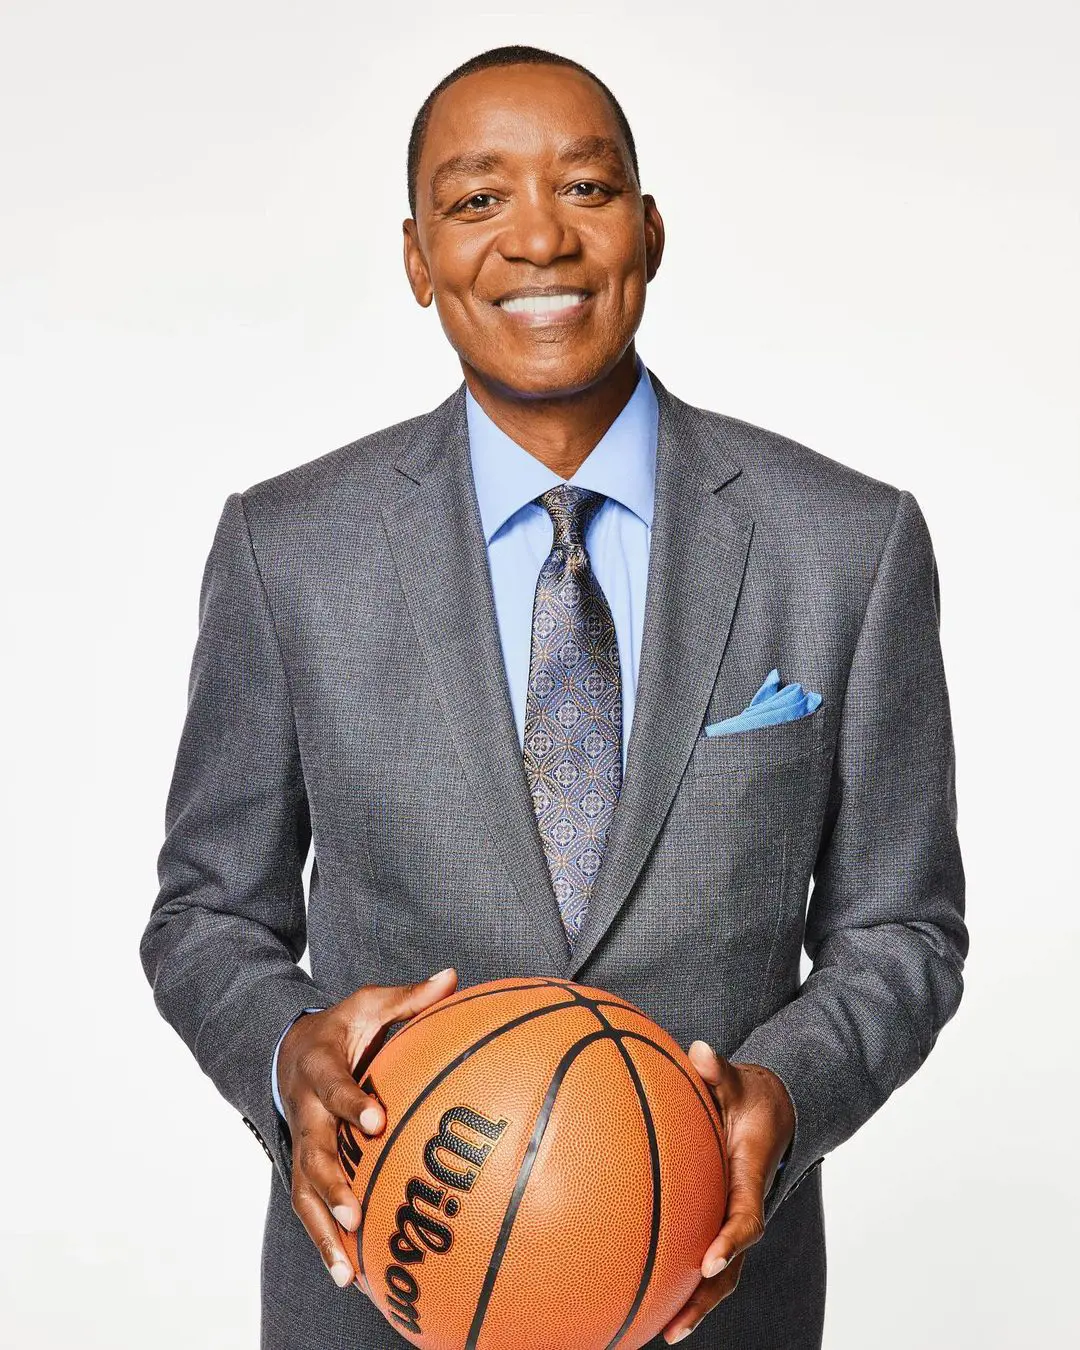 Isiah Thomas Married a Secret Service Agent's Daughter - FanBuzz